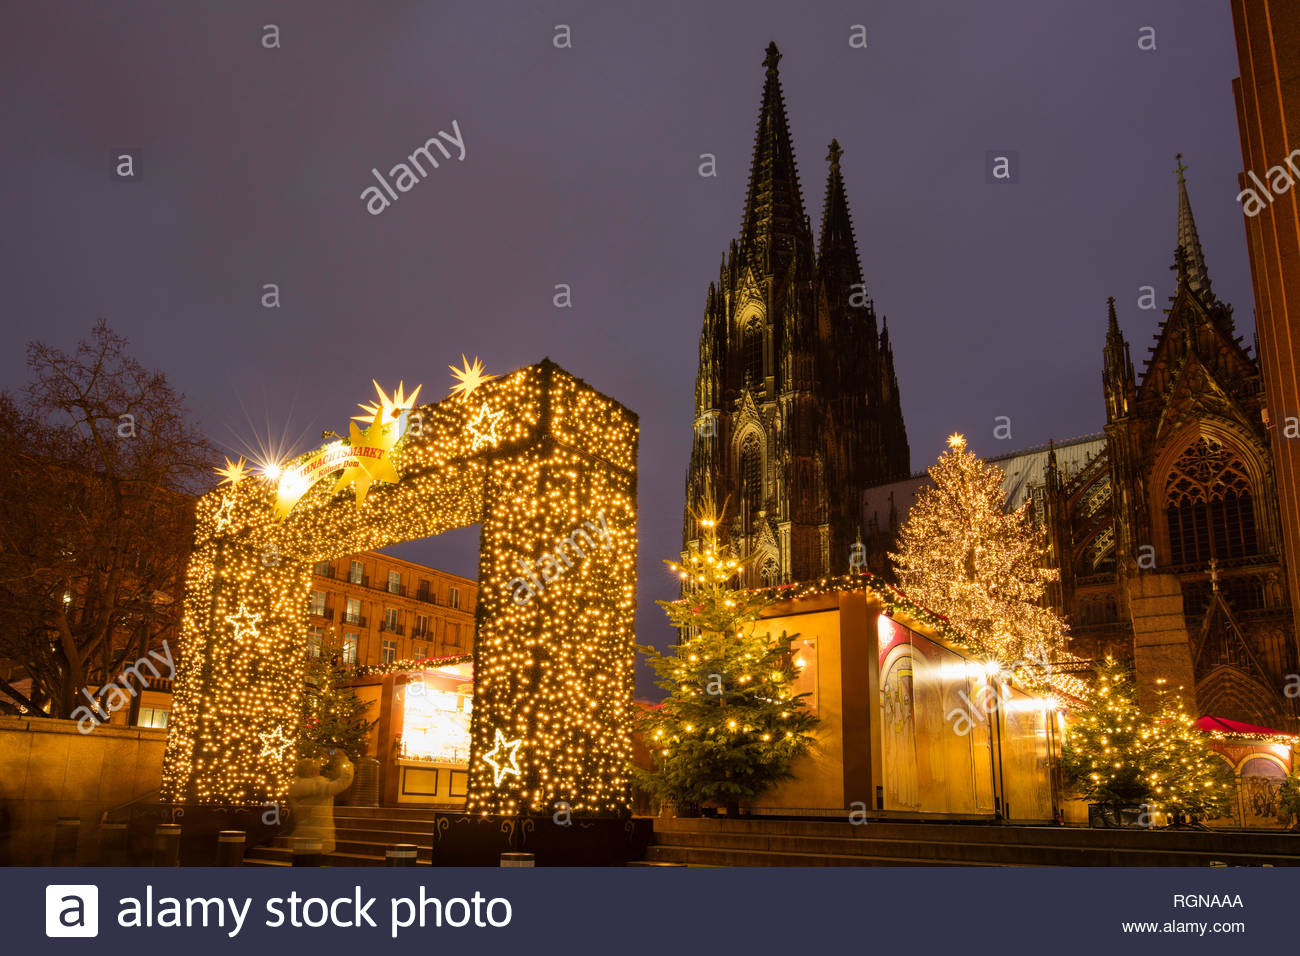 Germany Cologne Christmas Market With Cathedral In The